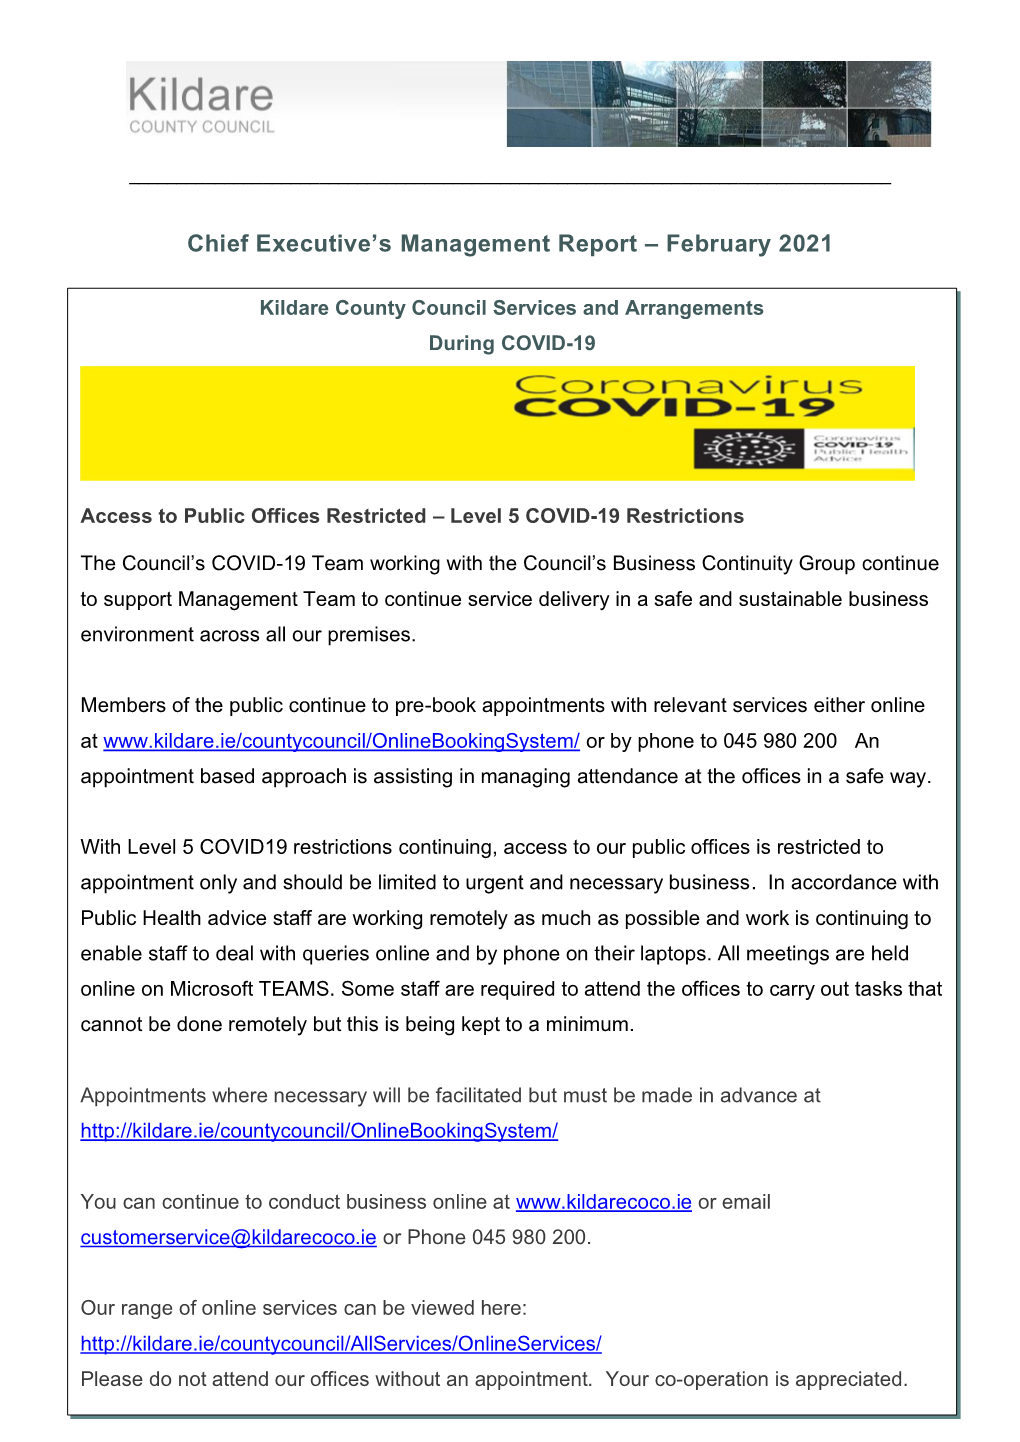 Chief Executive's Report February 2021